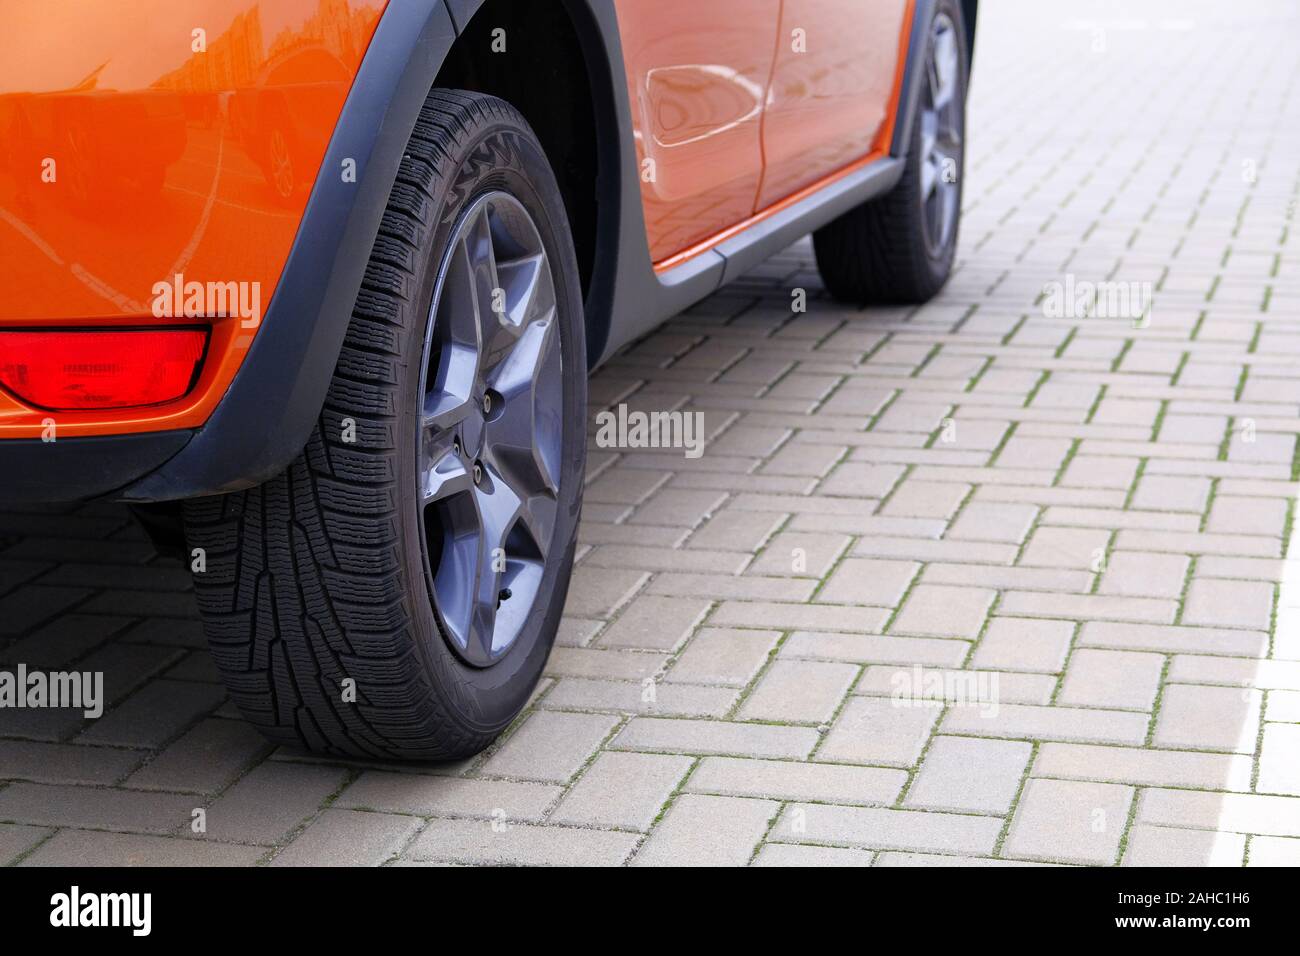 Orange car is parked in its parking spot in city. Close up car wheel, urban environment. Stock Photo